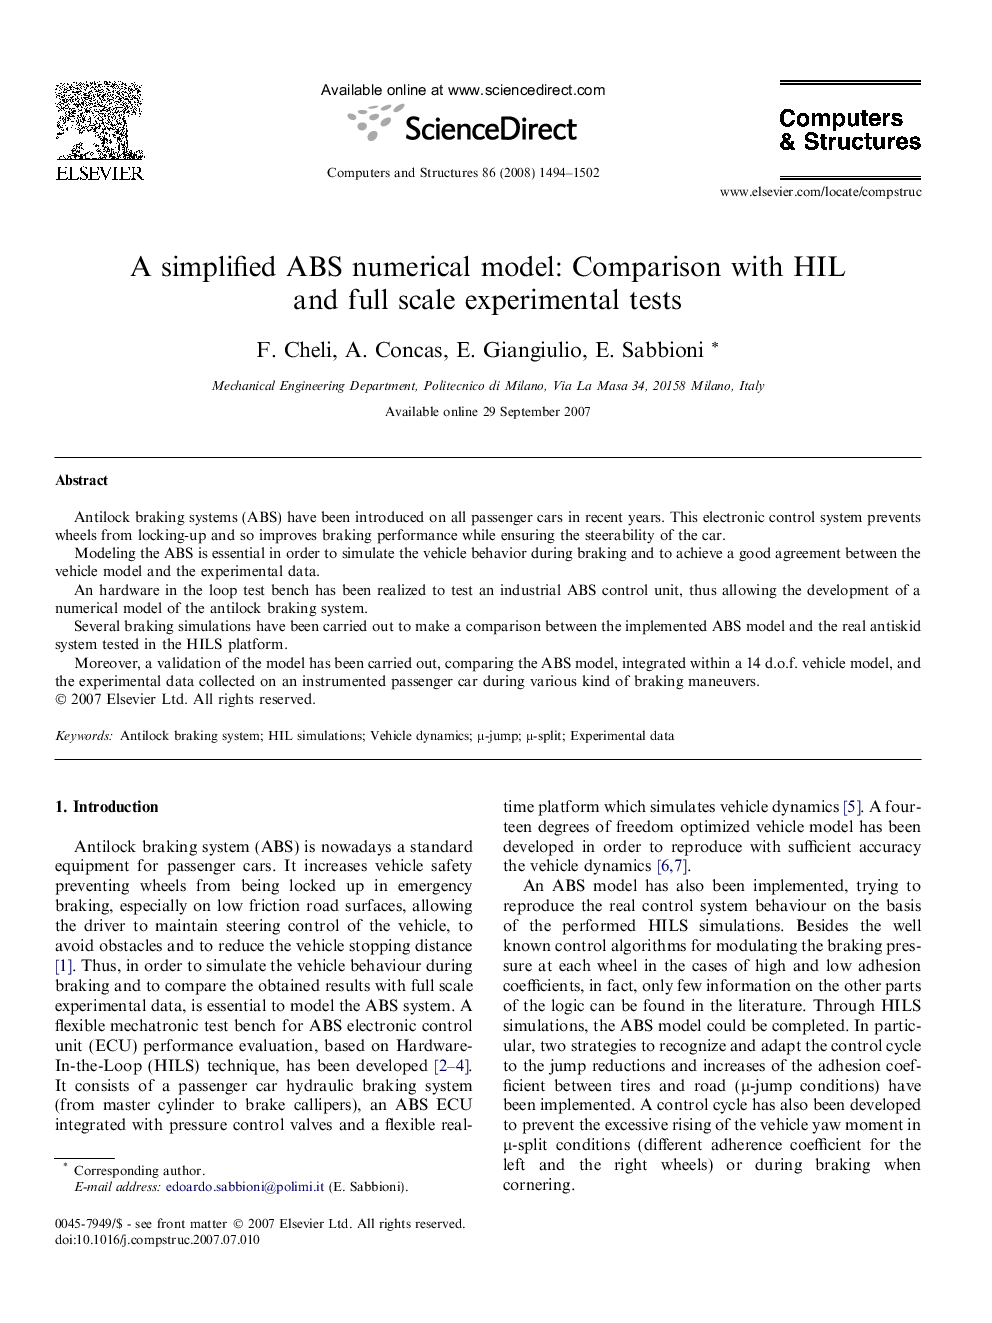 A simplified ABS numerical model: Comparison with HIL and full scale experimental tests